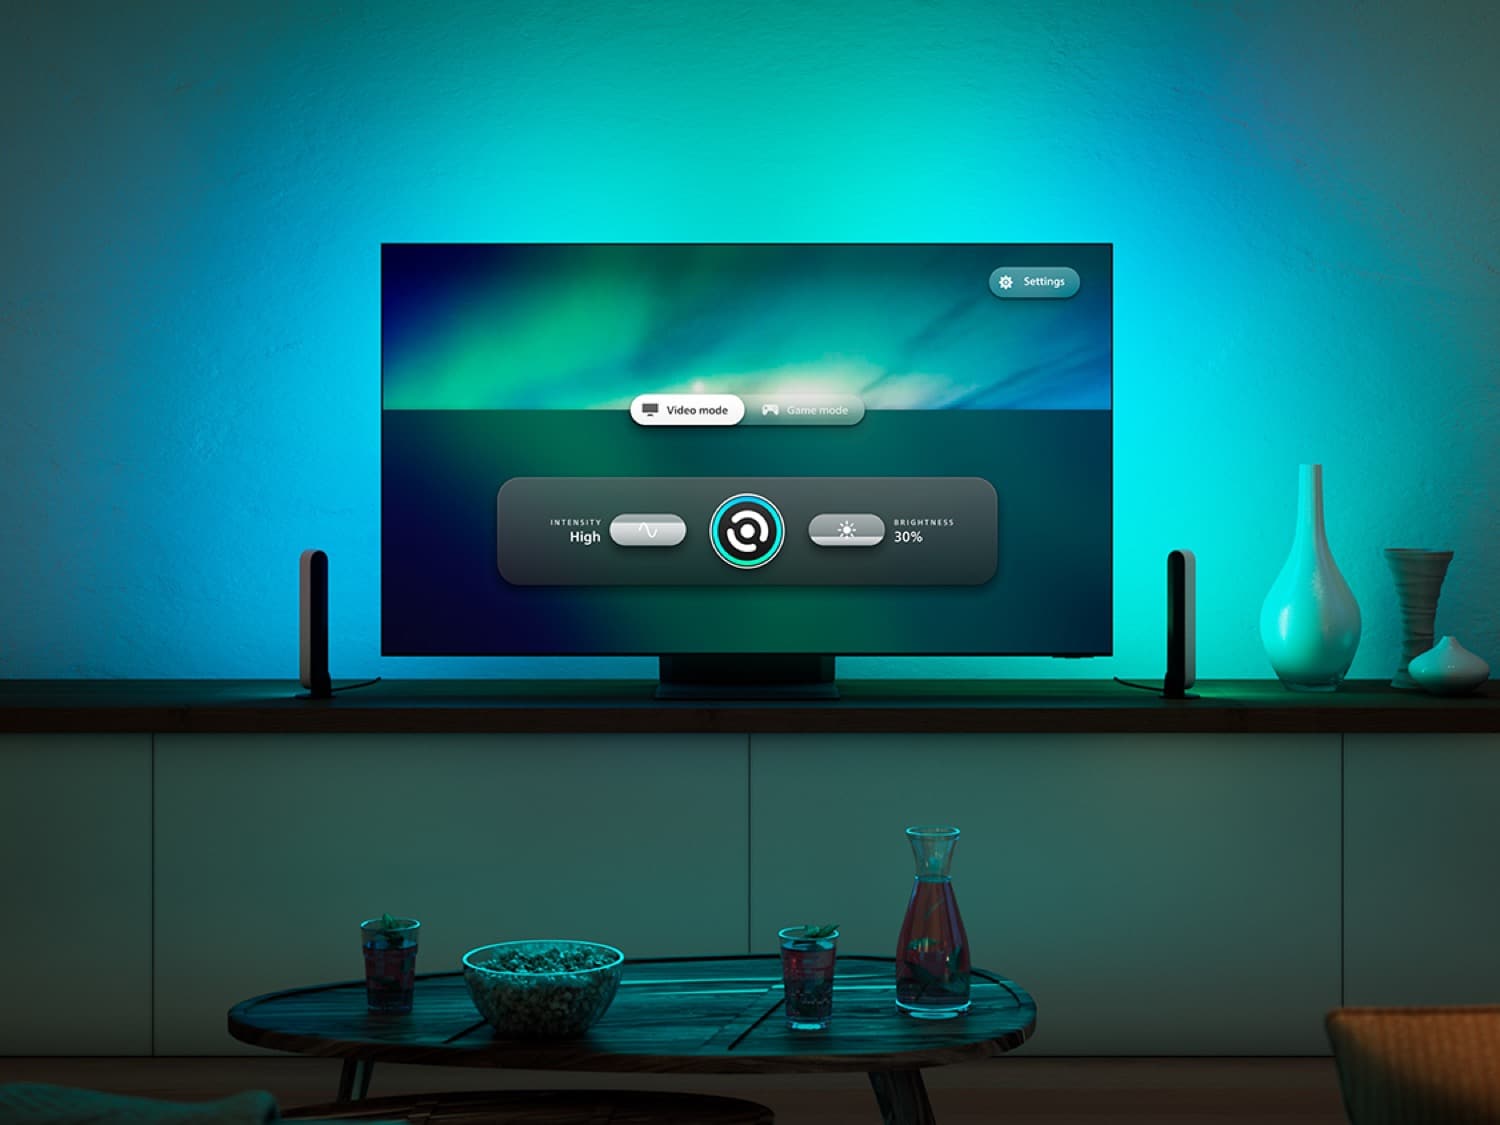 Hueblog: When will the Hue Sync TV app be available for other TVs?